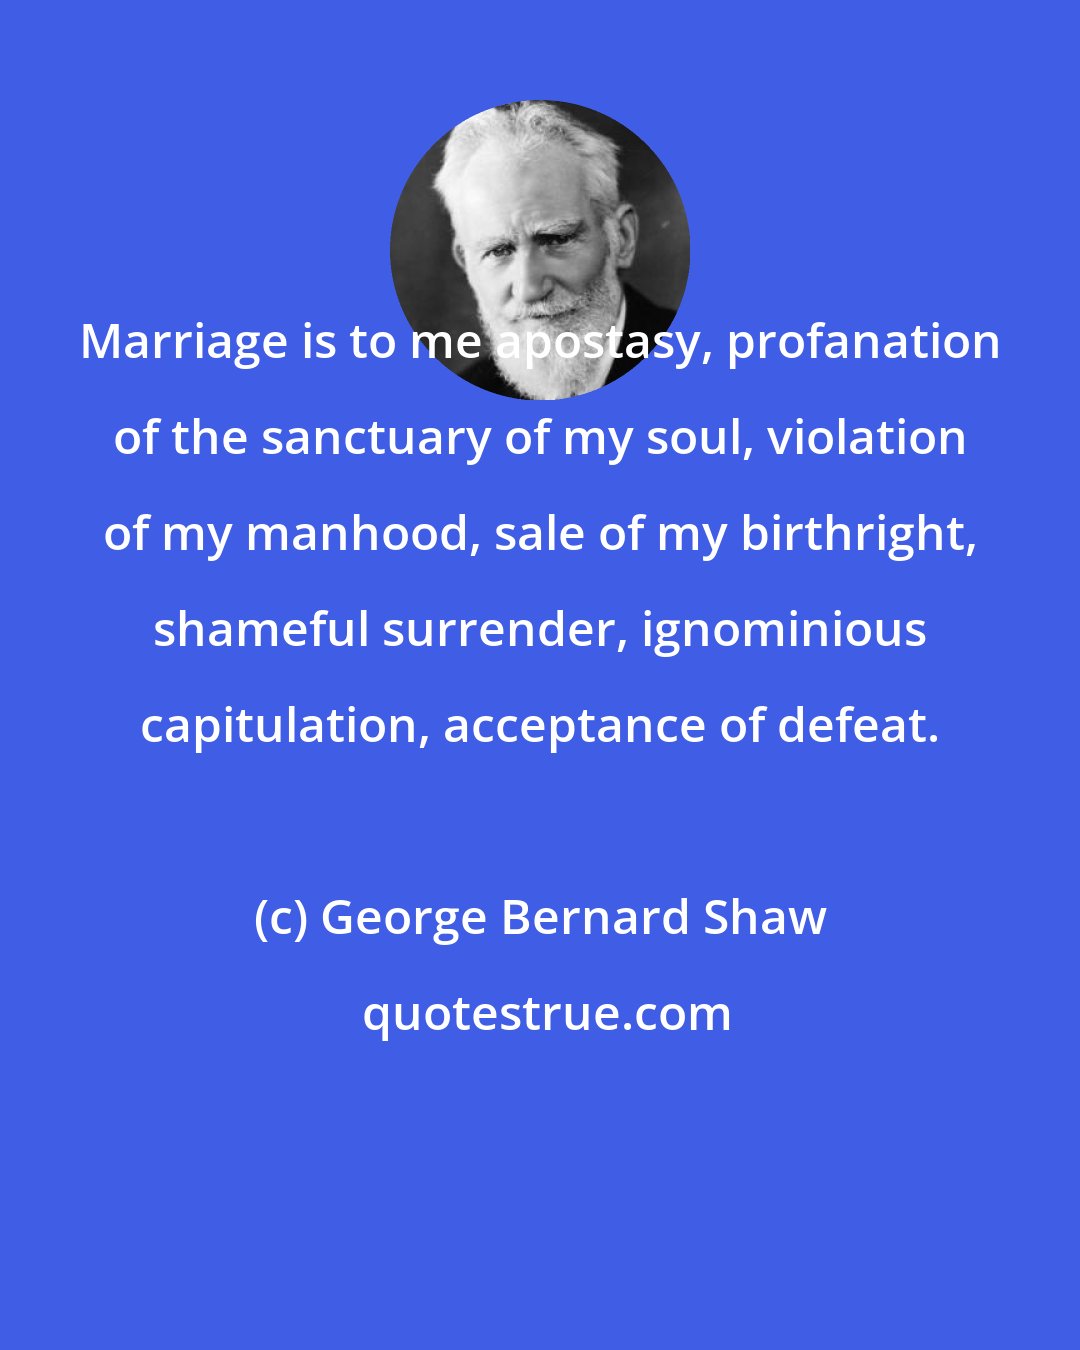 George Bernard Shaw: Marriage is to me apostasy, profanation of the sanctuary of my soul, violation of my manhood, sale of my birthright, shameful surrender, ignominious capitulation, acceptance of defeat.